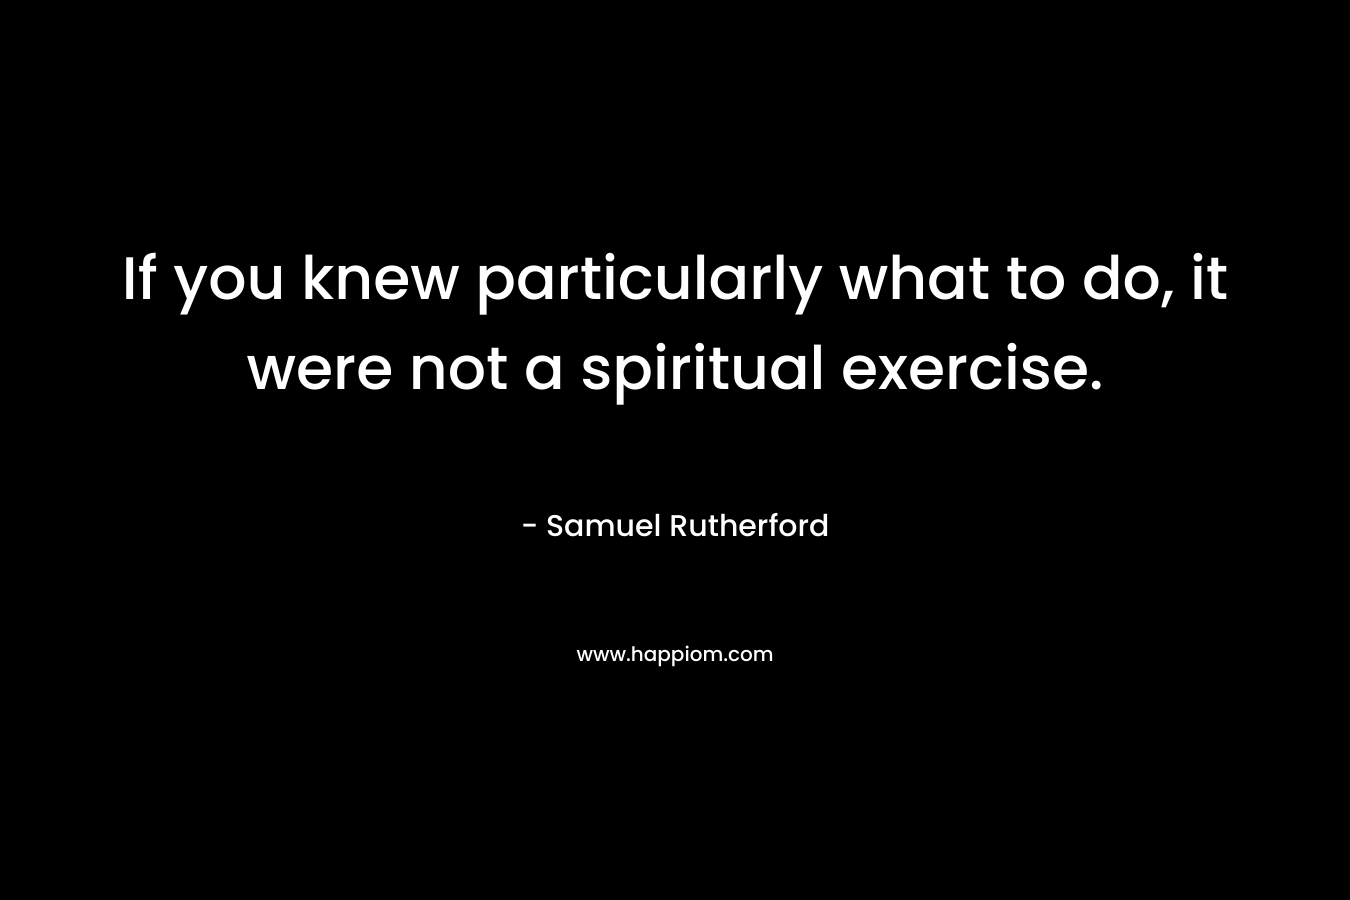 If you knew particularly what to do, it were not a spiritual exercise.